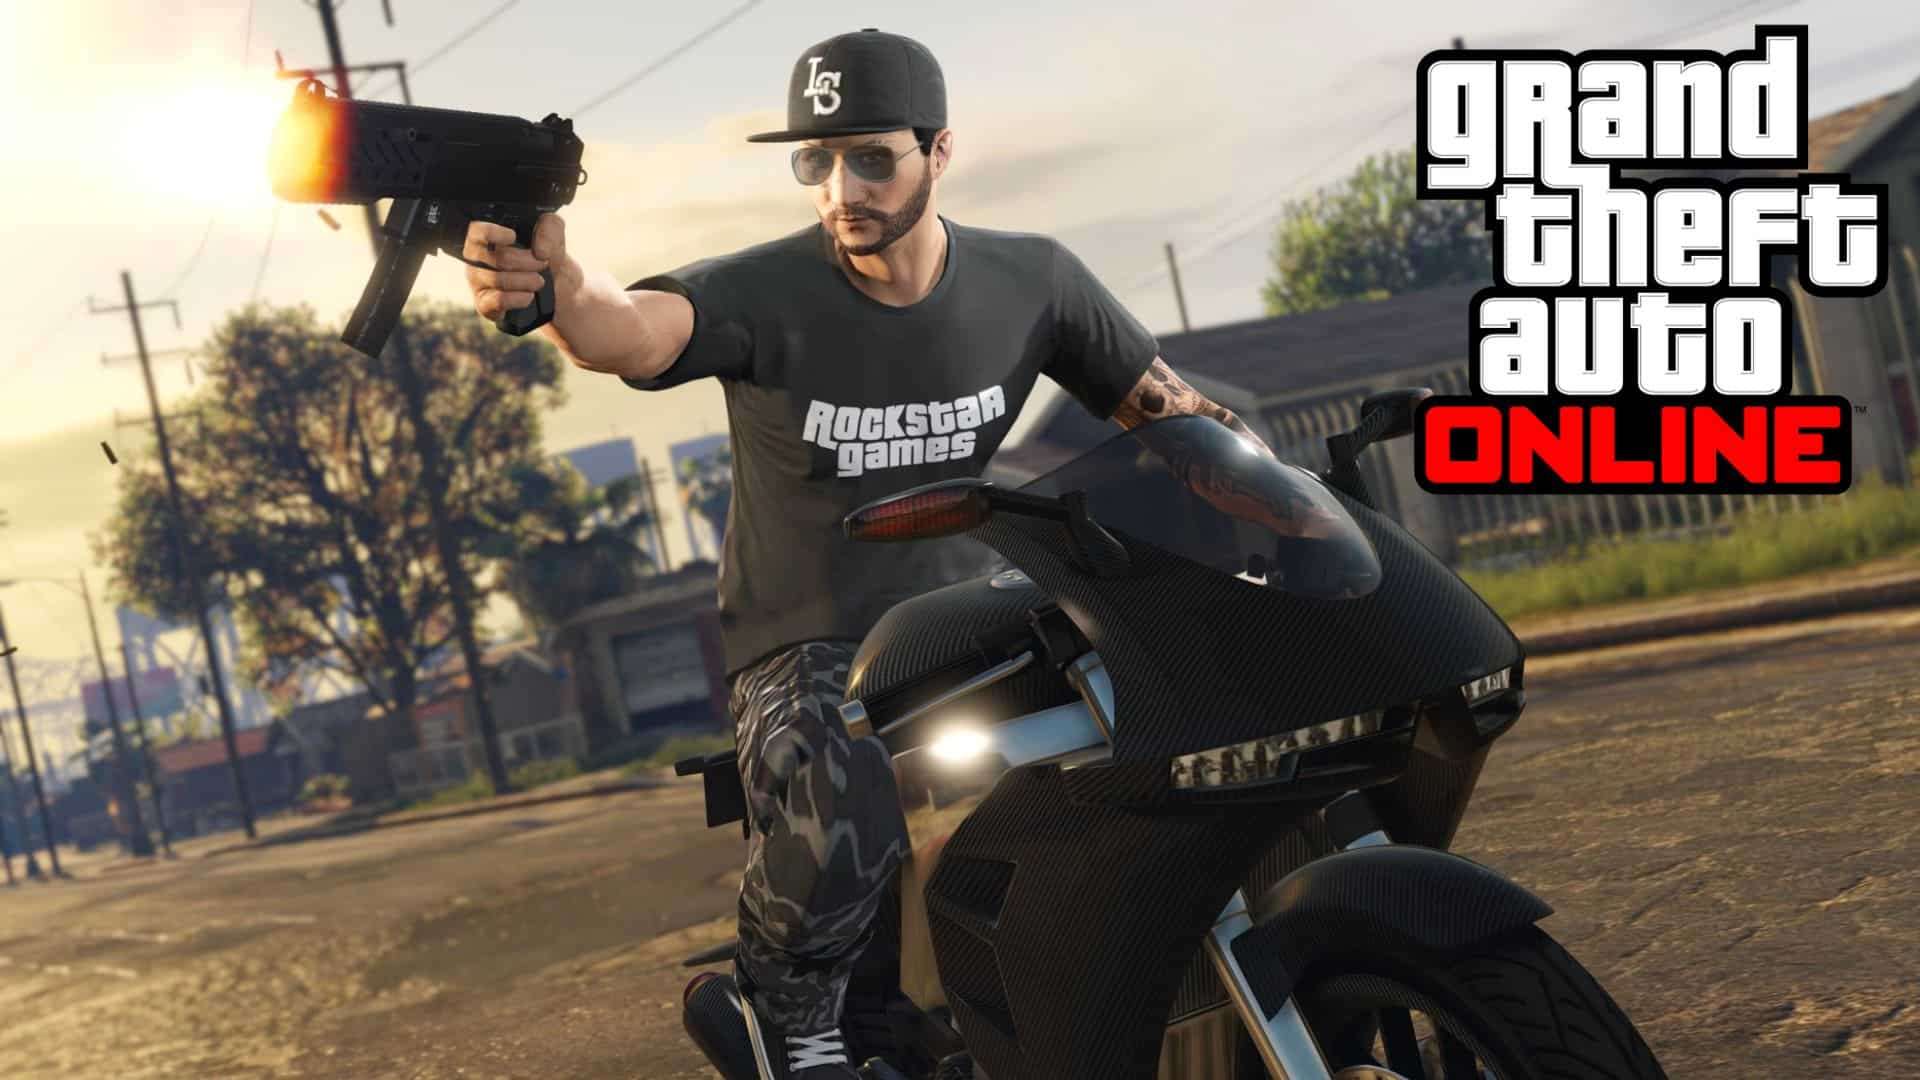 GTA Online character riding bike with gun out